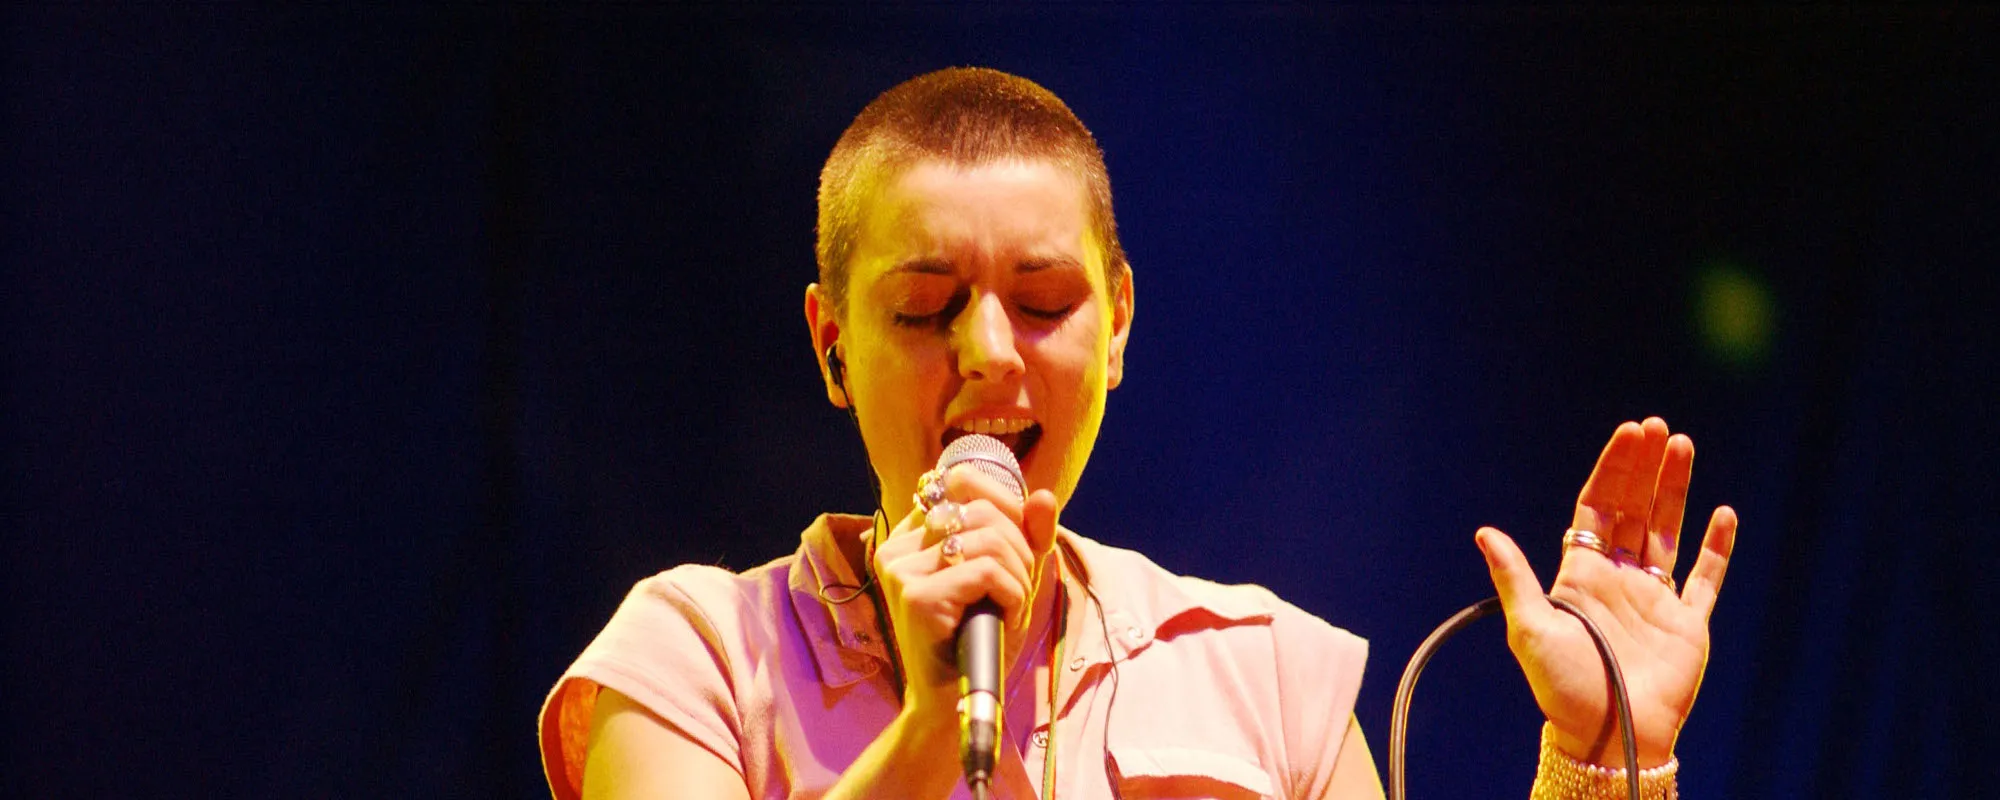 Our 5 Favorite Features with Sinéad O’Connor